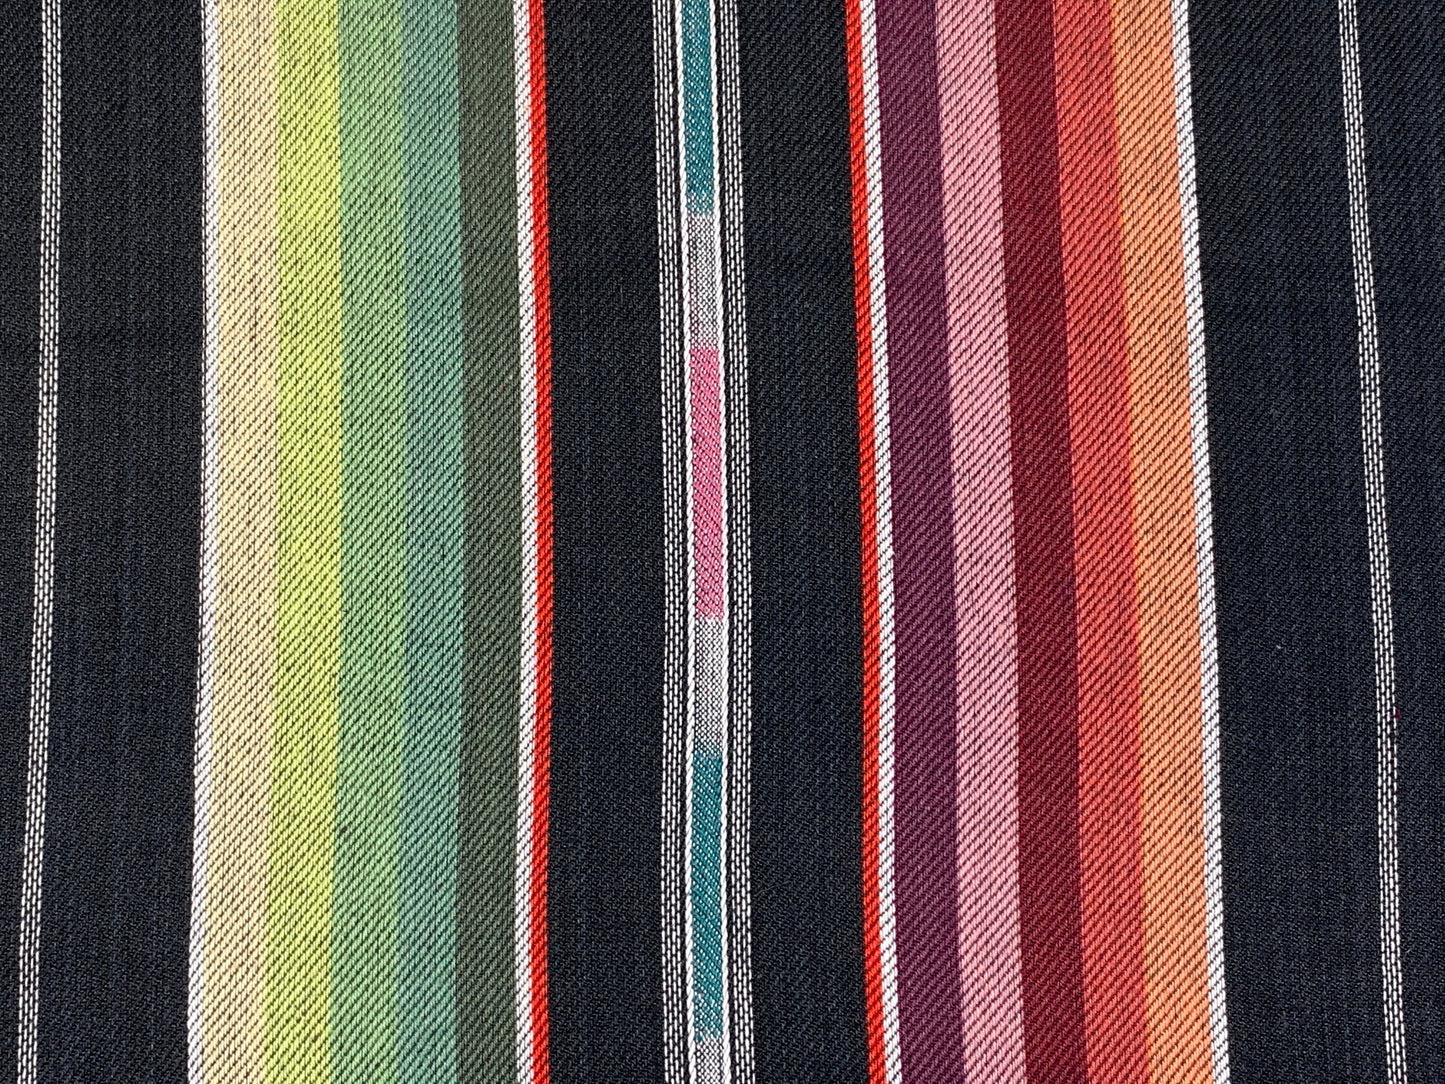 Southwest Style Woven Black, Green, & Pink